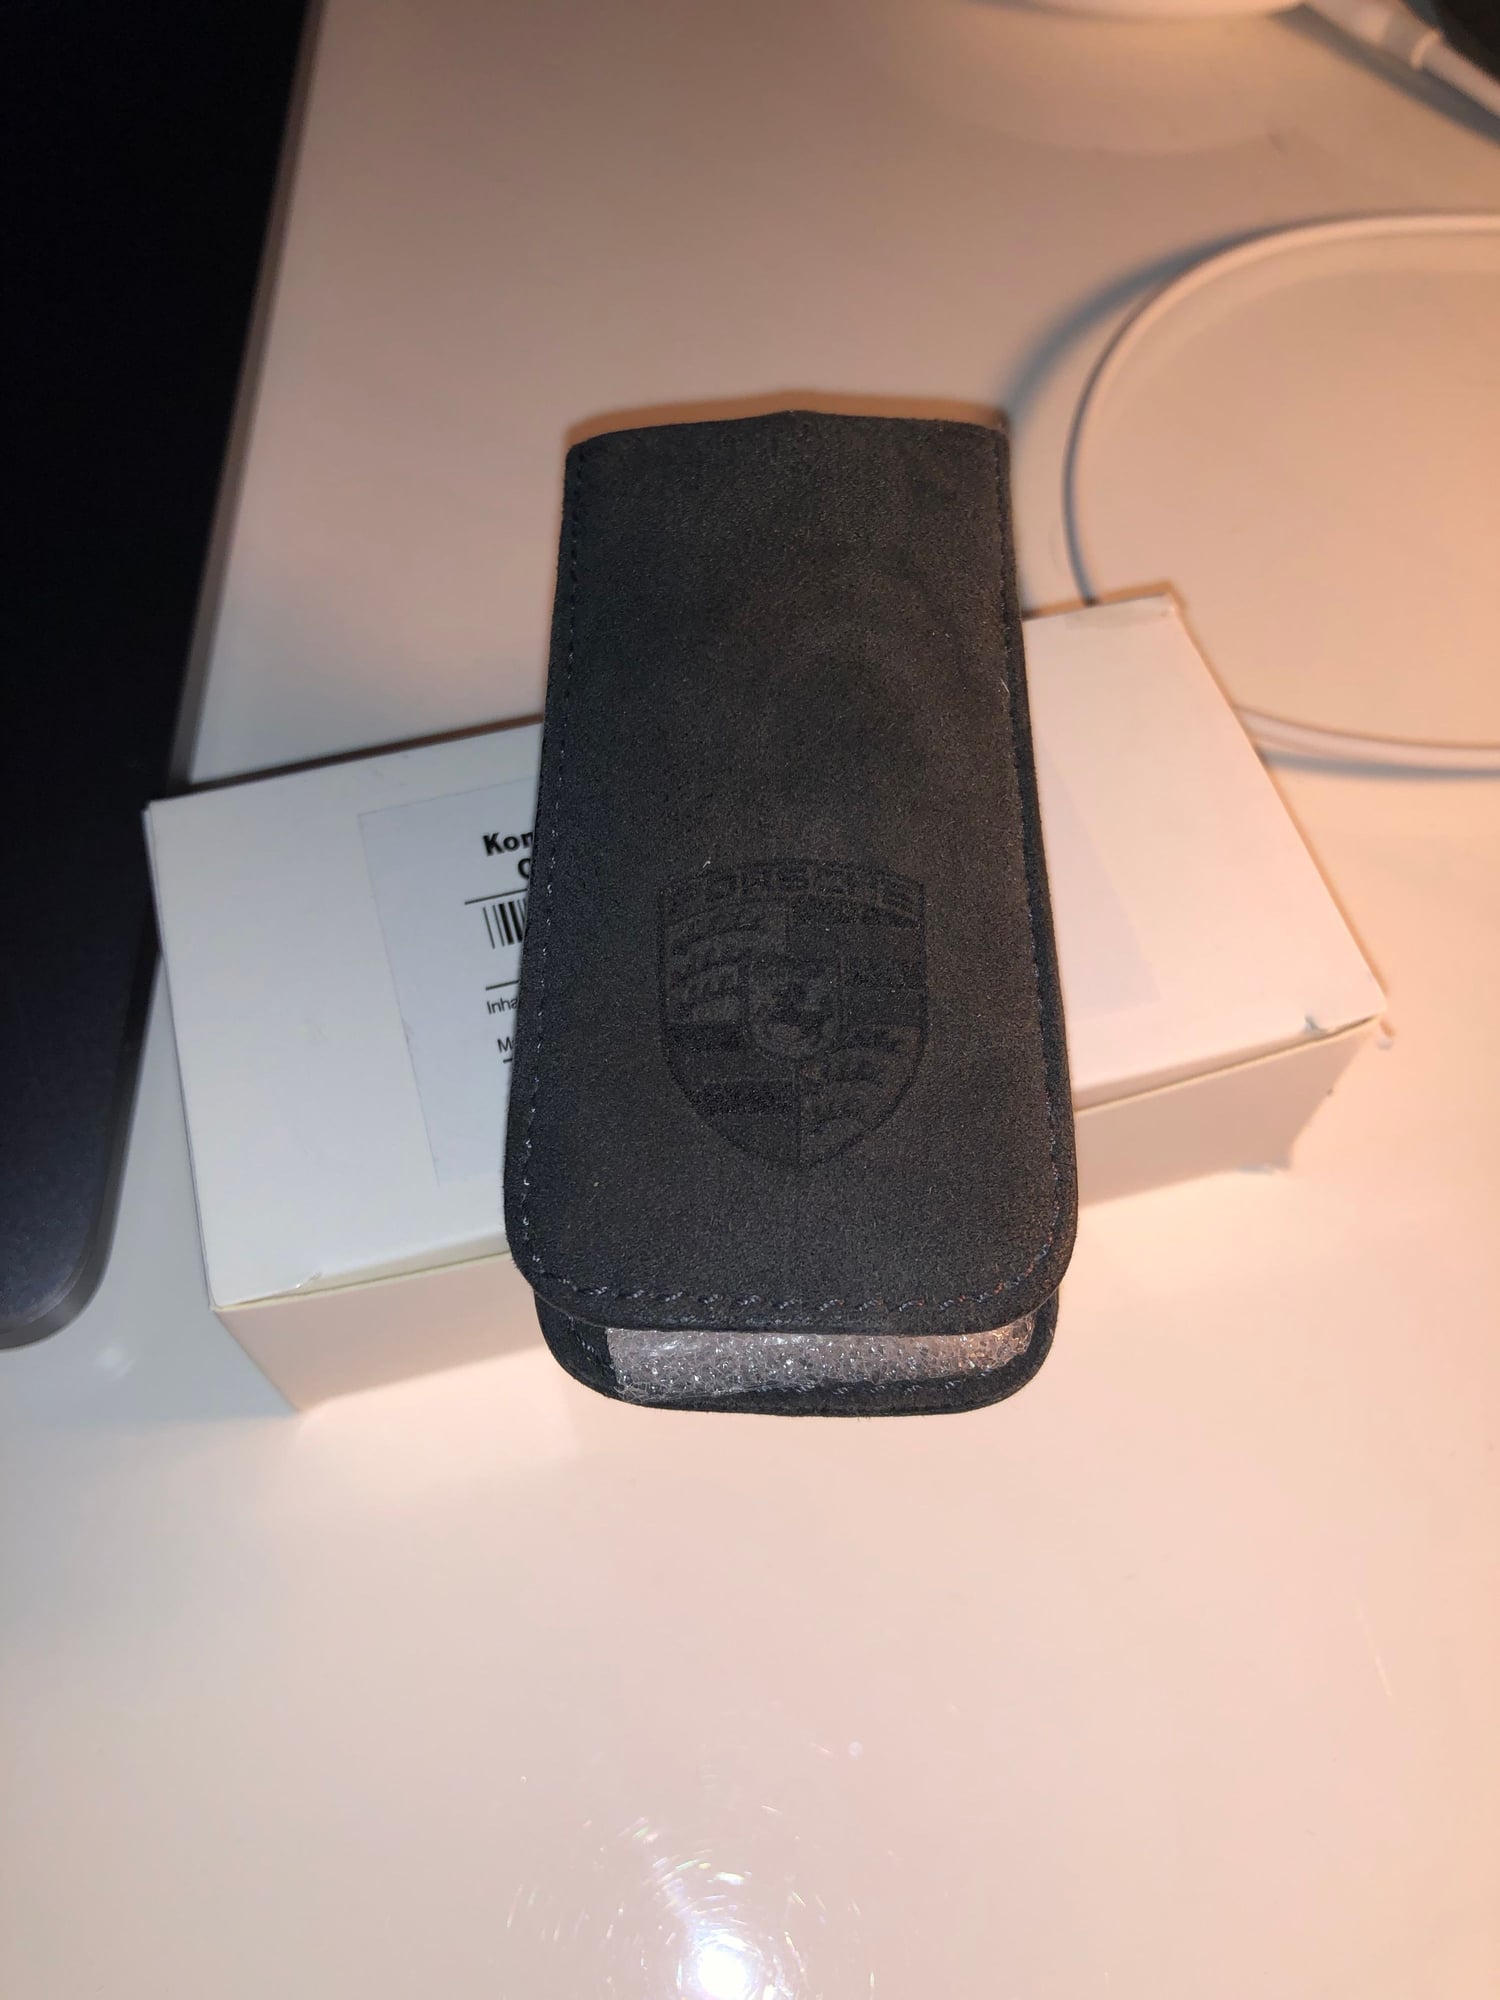 Accessories - Alcantara Key case/pouch - Used - Fort Lauderdale, FL 33312, United States